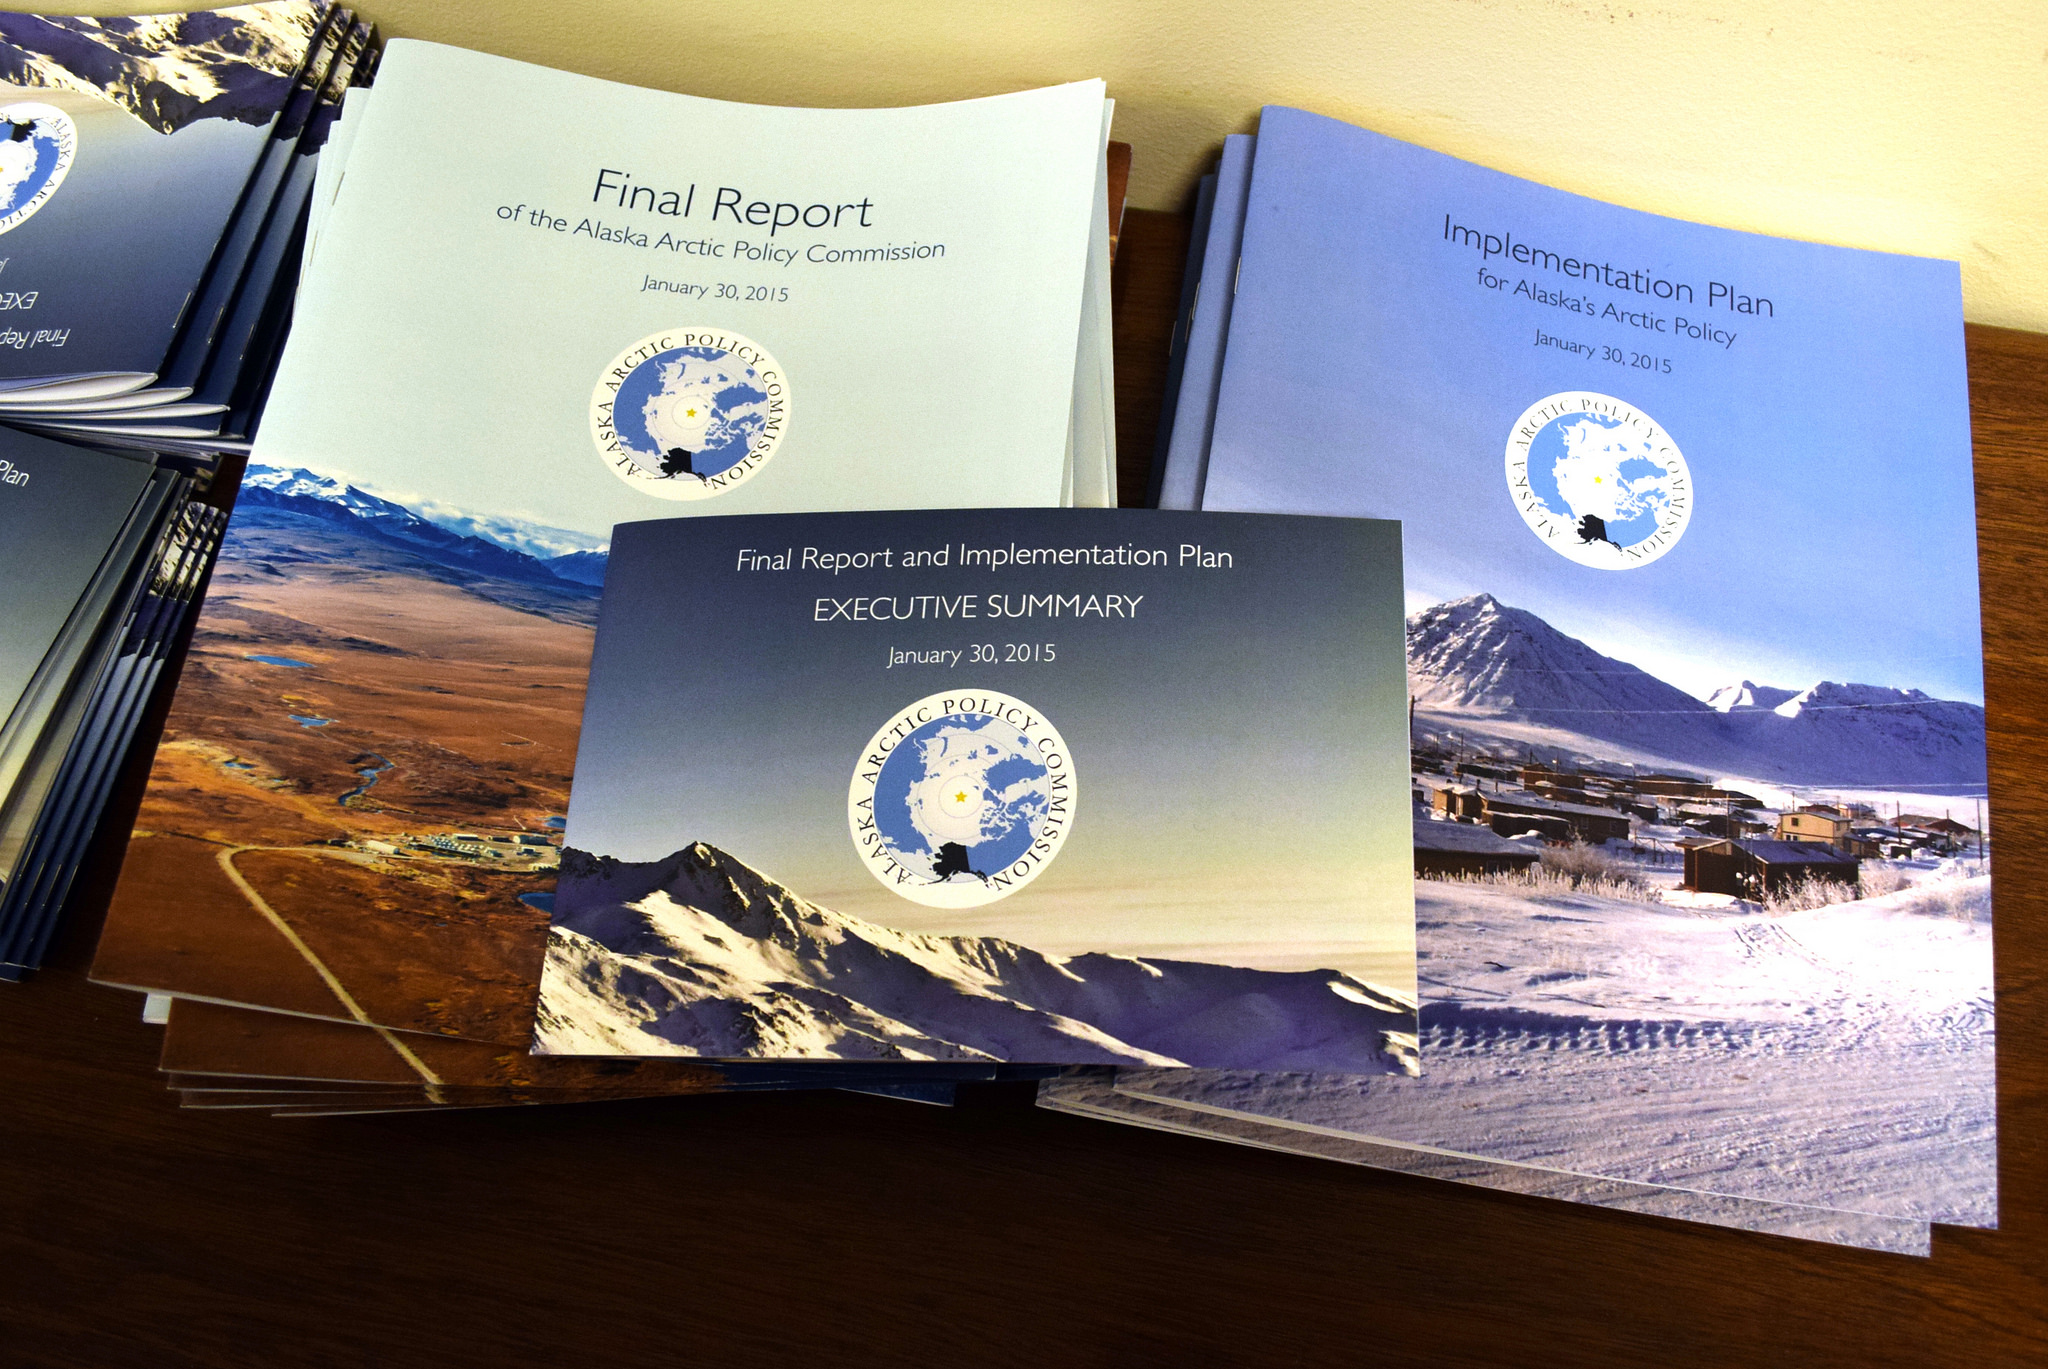 The final report of the Alaska Arctic Policy Commission, released Jan. 30, 2015, includes a separate executive summary and implementation plan. (Photo by Skip Gray/360 North)